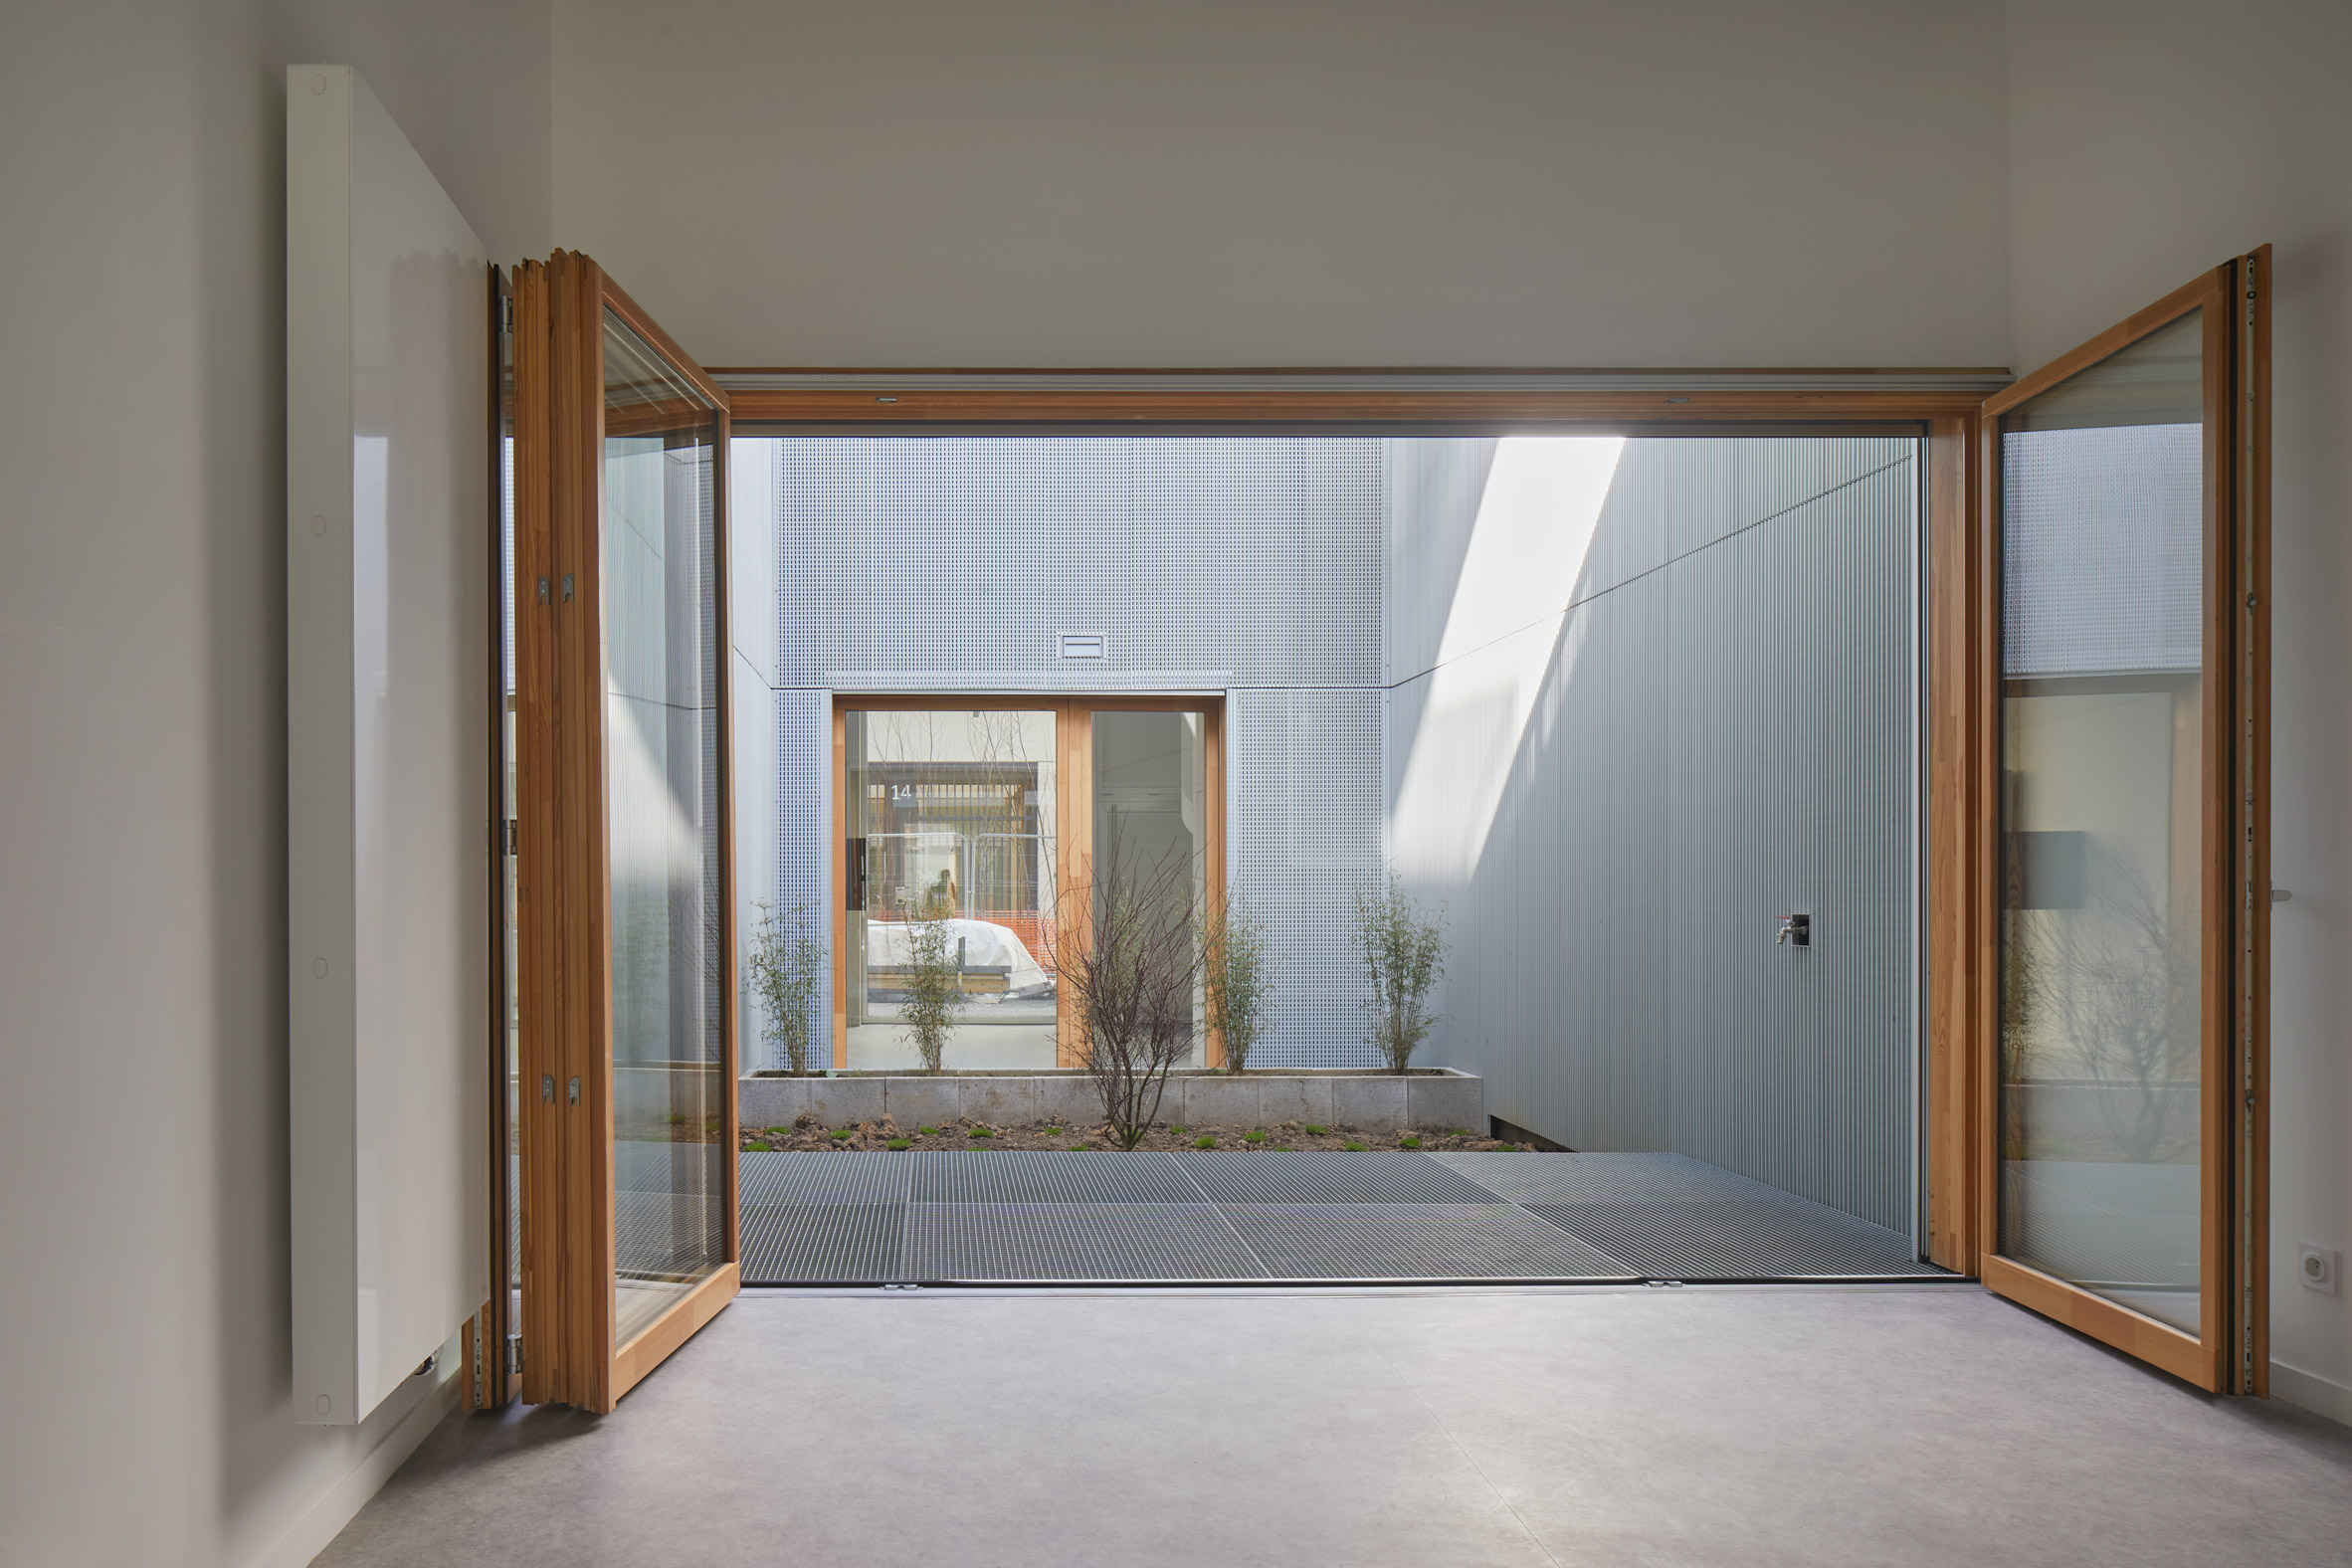 An apartment with a central courtyard